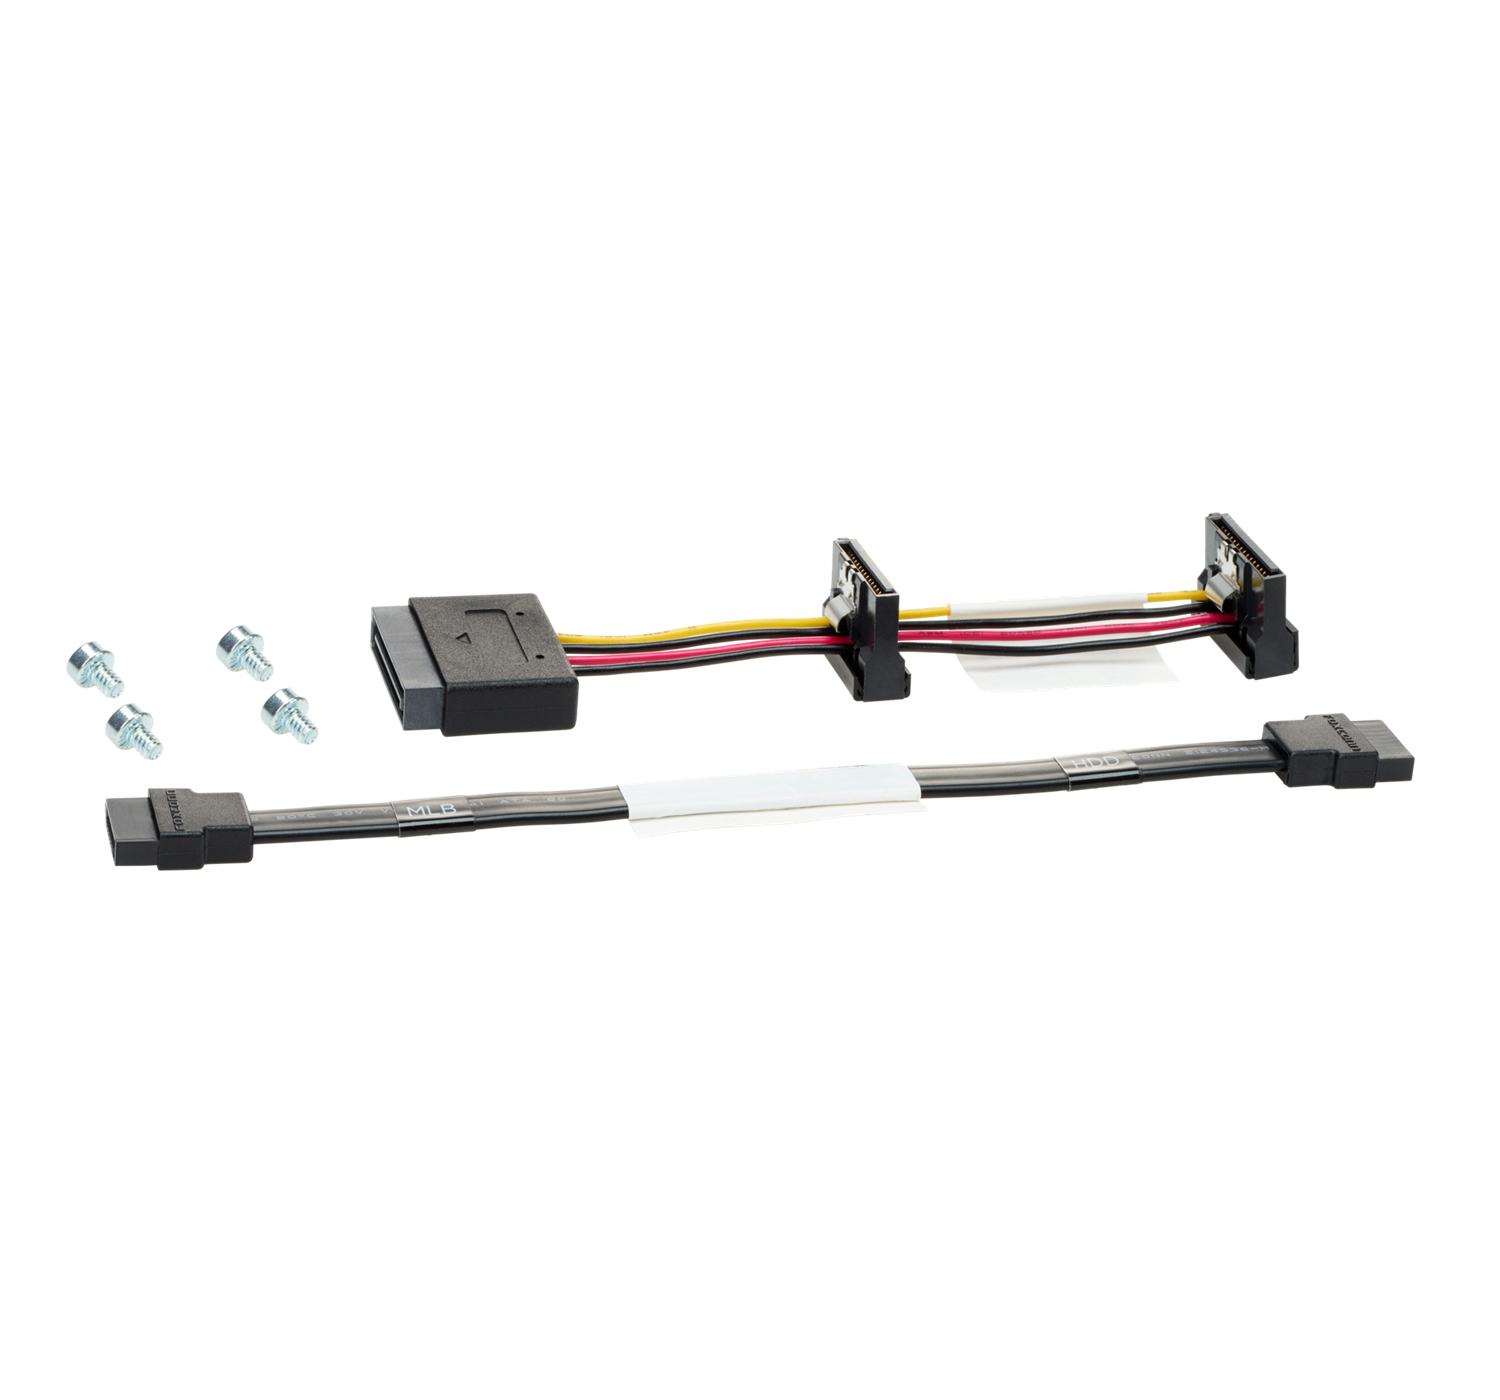 HPE ML350 GEN10 GPU EXT POWER CABLE KIT